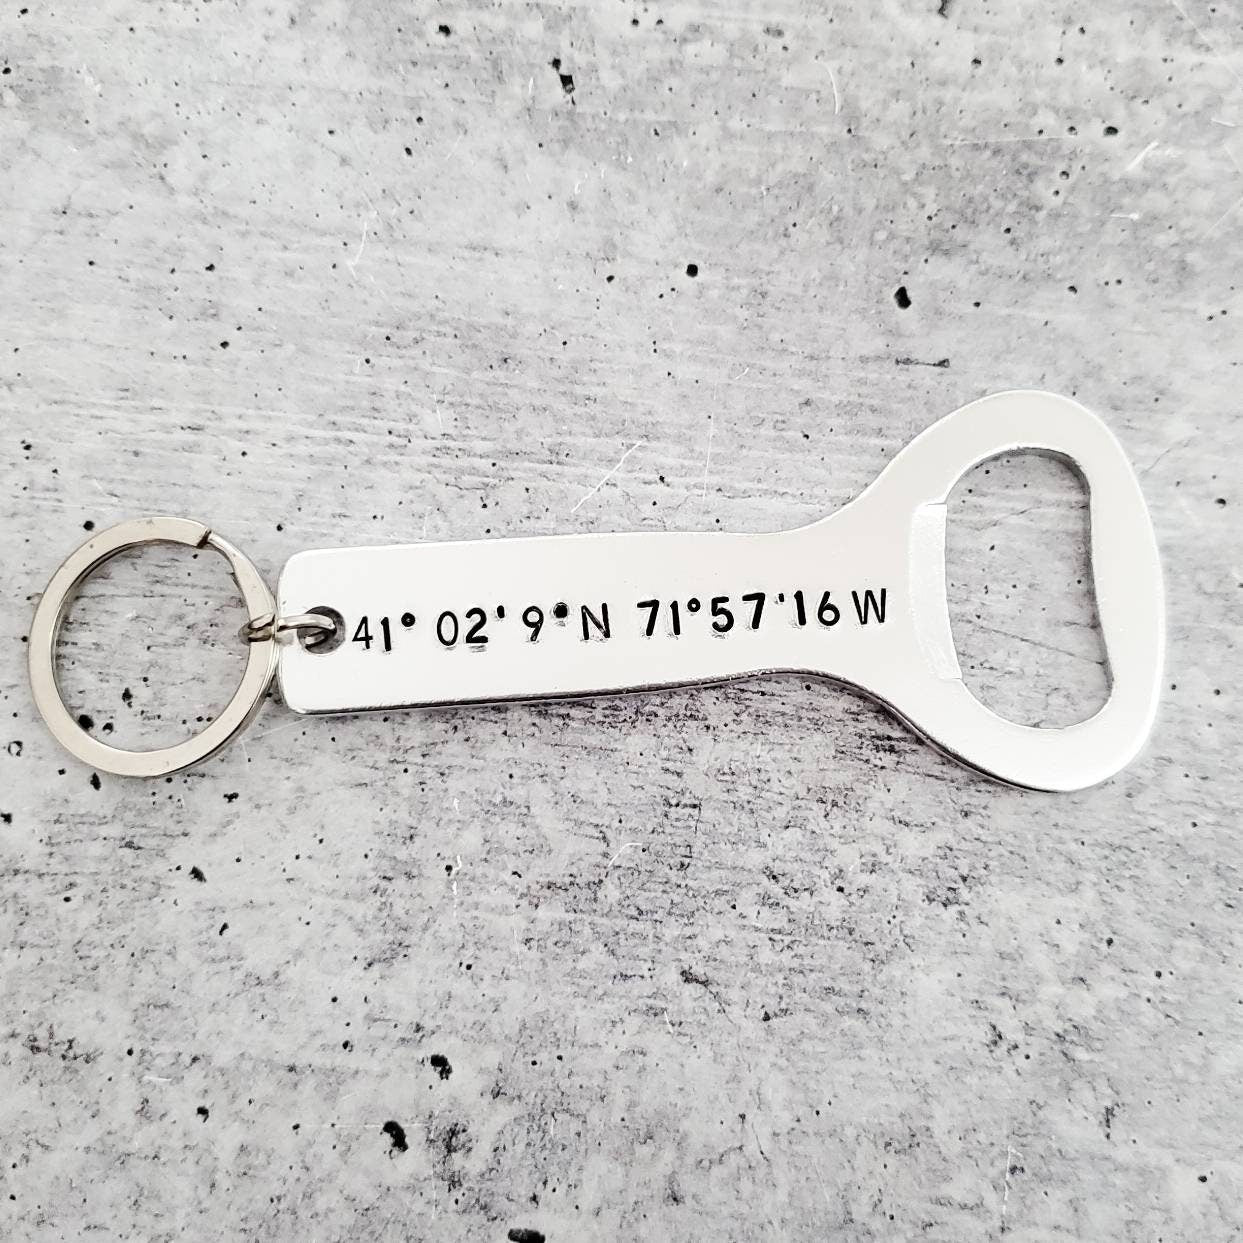 Coordinates Personalized Beer Bottle Opener Keychain Salt and Sparkle